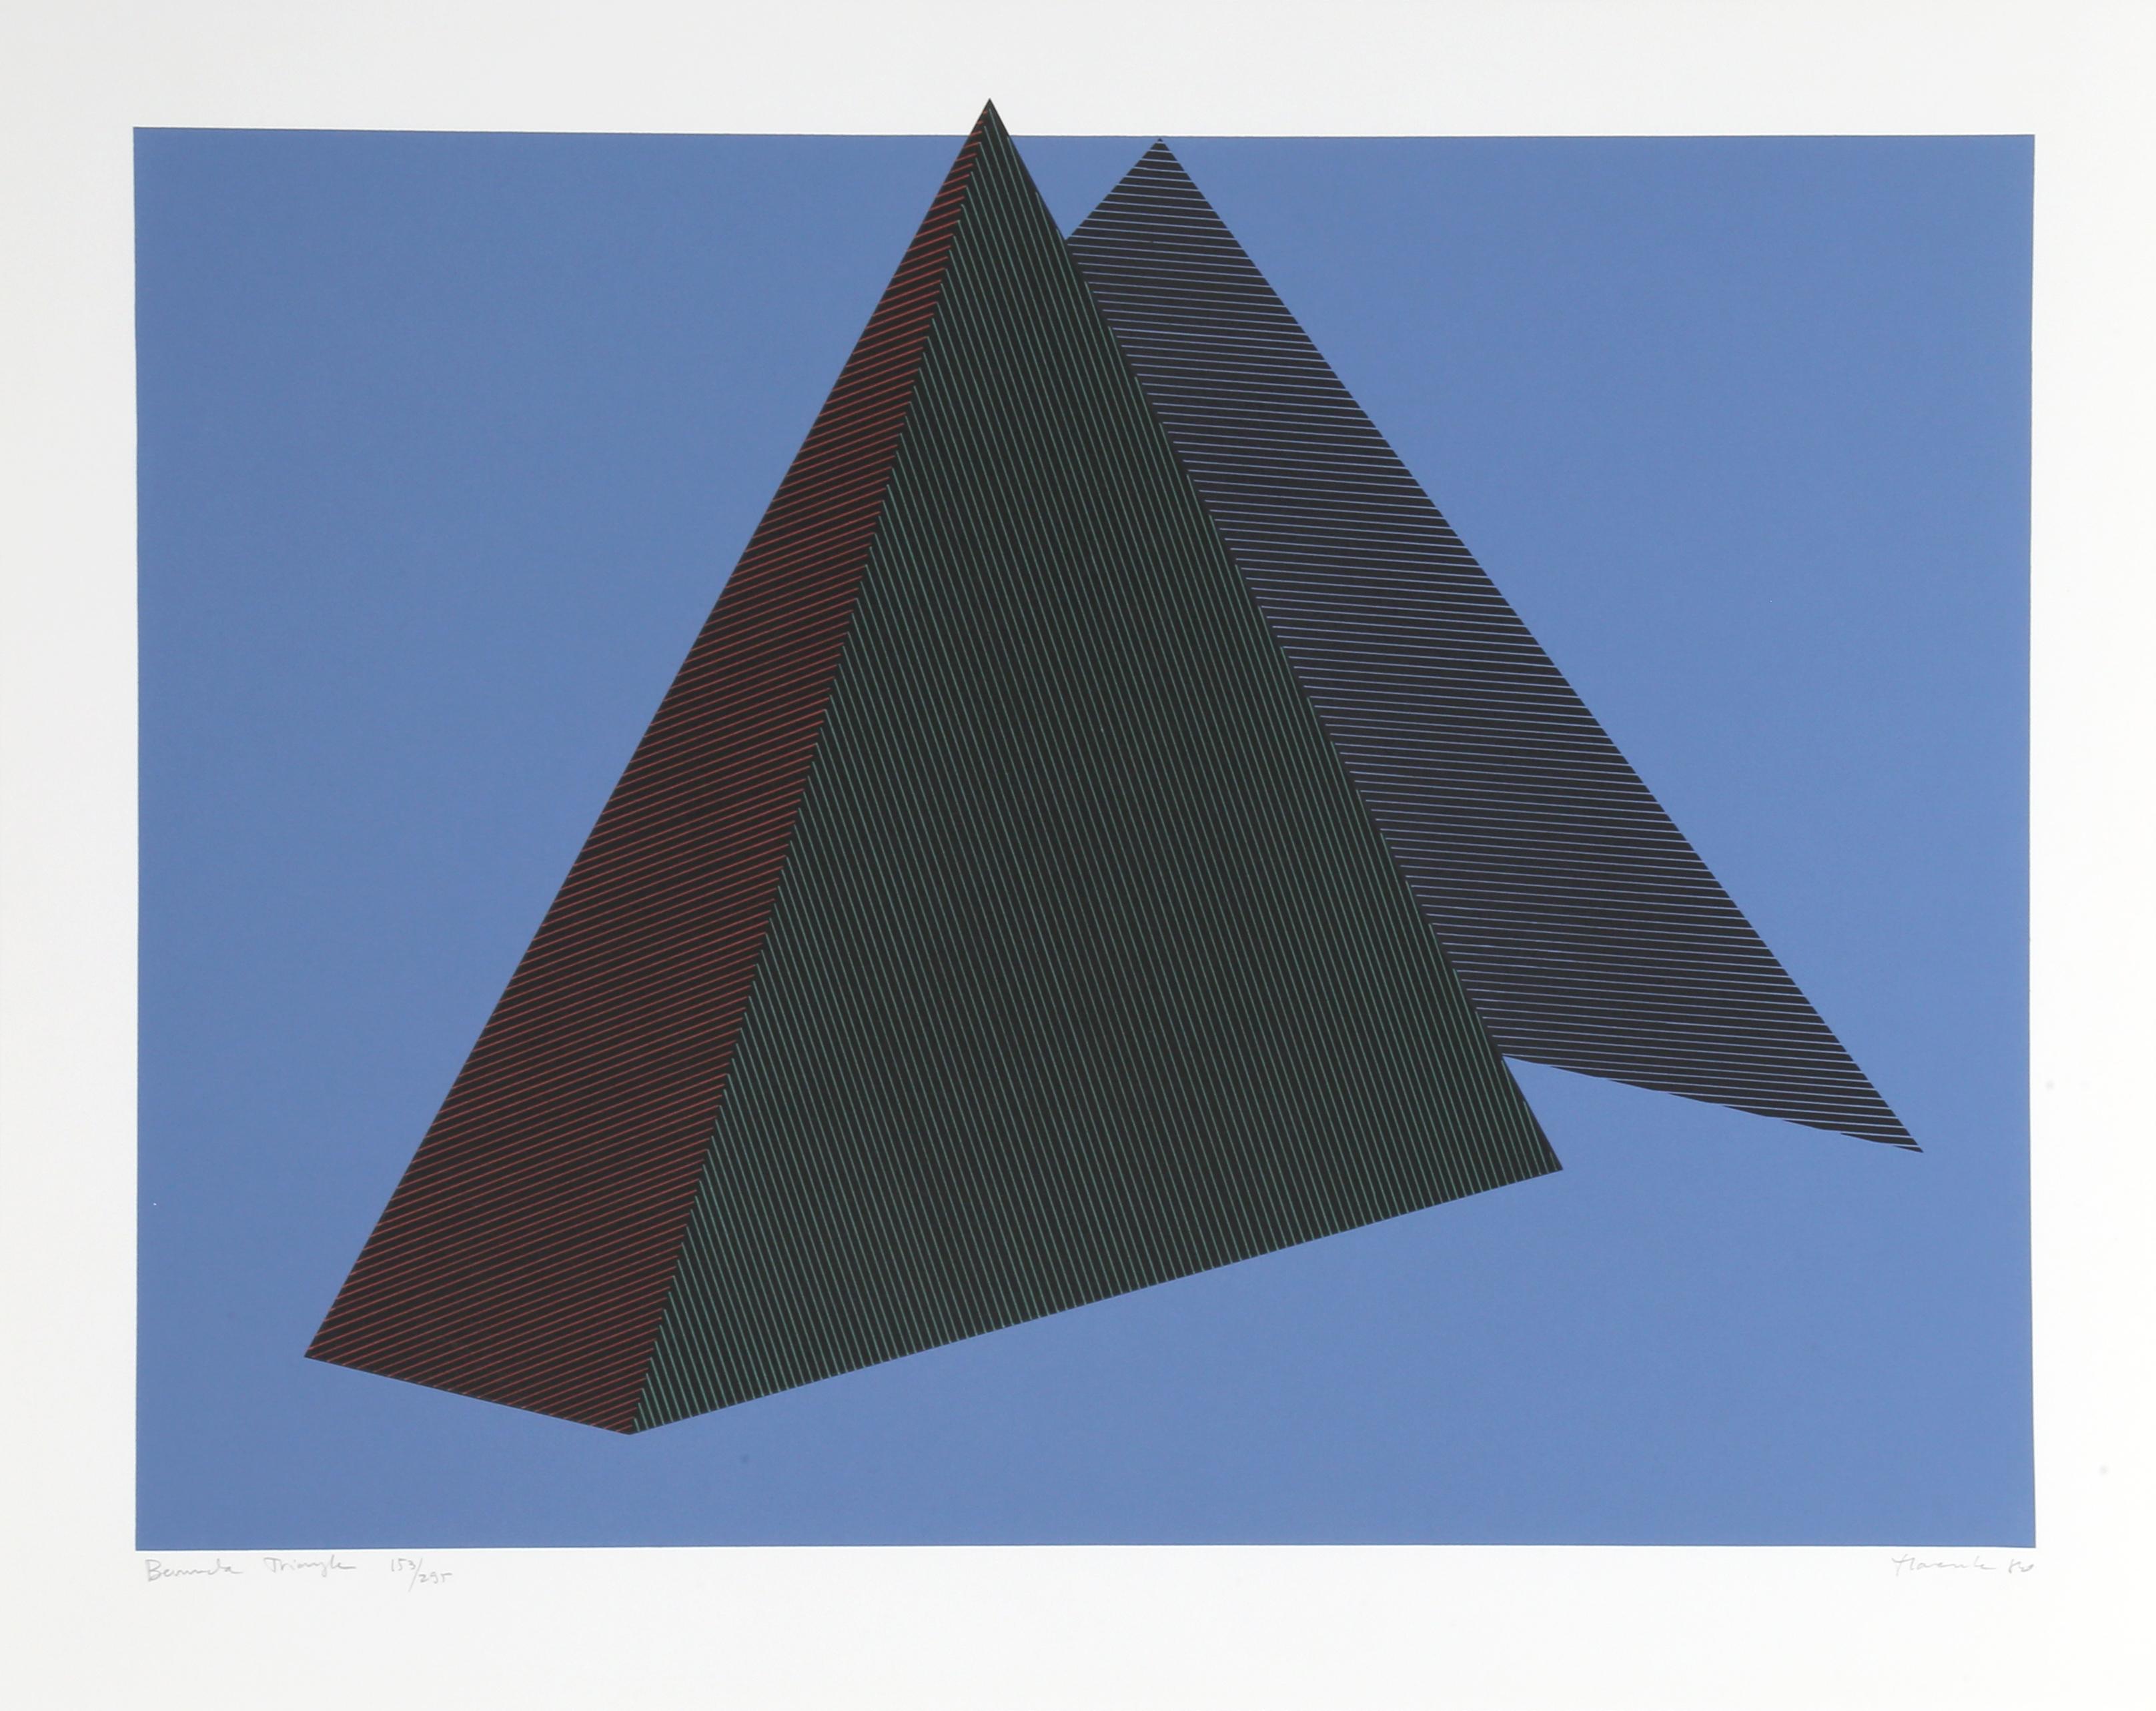 Artist: Jean-Marie Haessle, American (1939 - )
Title: Bermuda Triangle
Medium: Screenprint, signed and numbered in pencil
Edition: 295
Paper Size: 23 in. x 29 in. (58.42 cm x 73.66 cm)